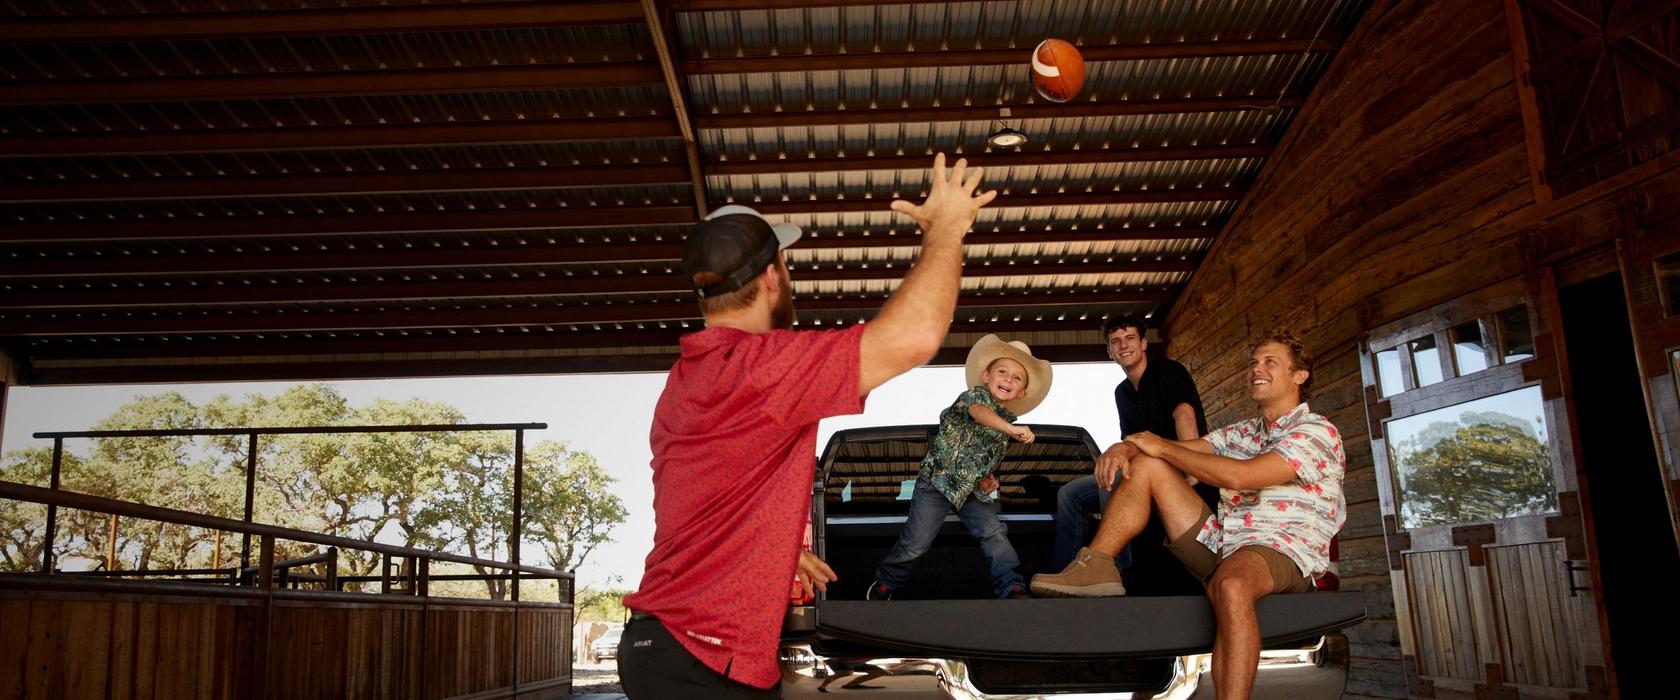 man playing catch with kids sitting in the back of a pick up truck